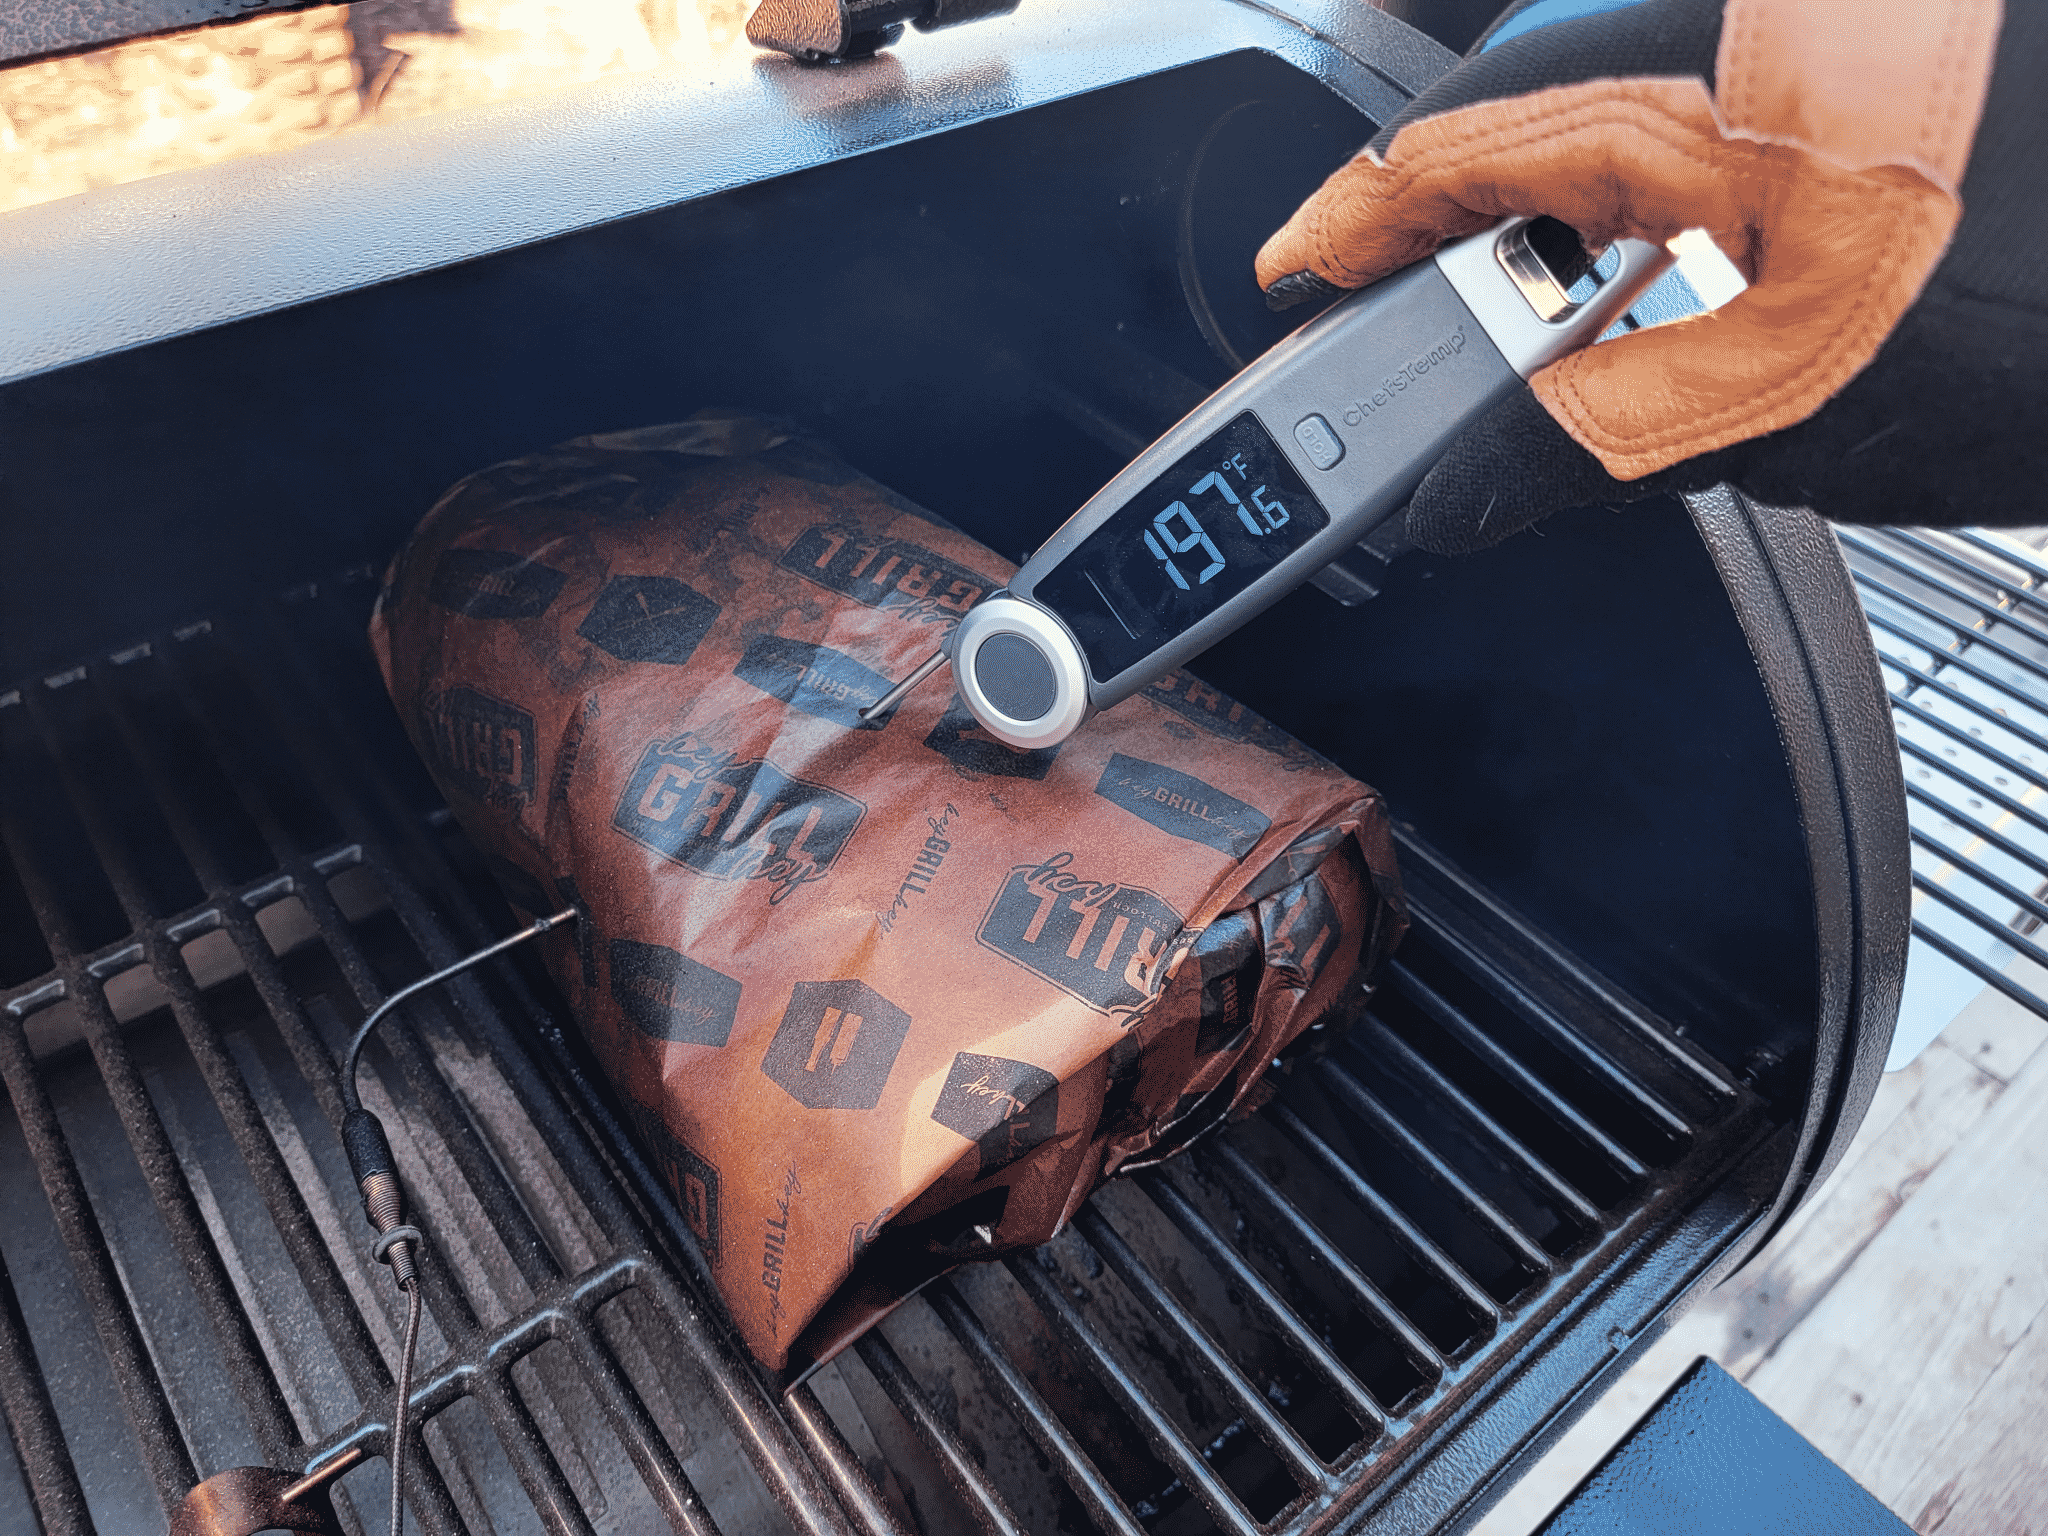 thermometer reading the temperature of meat on a grill